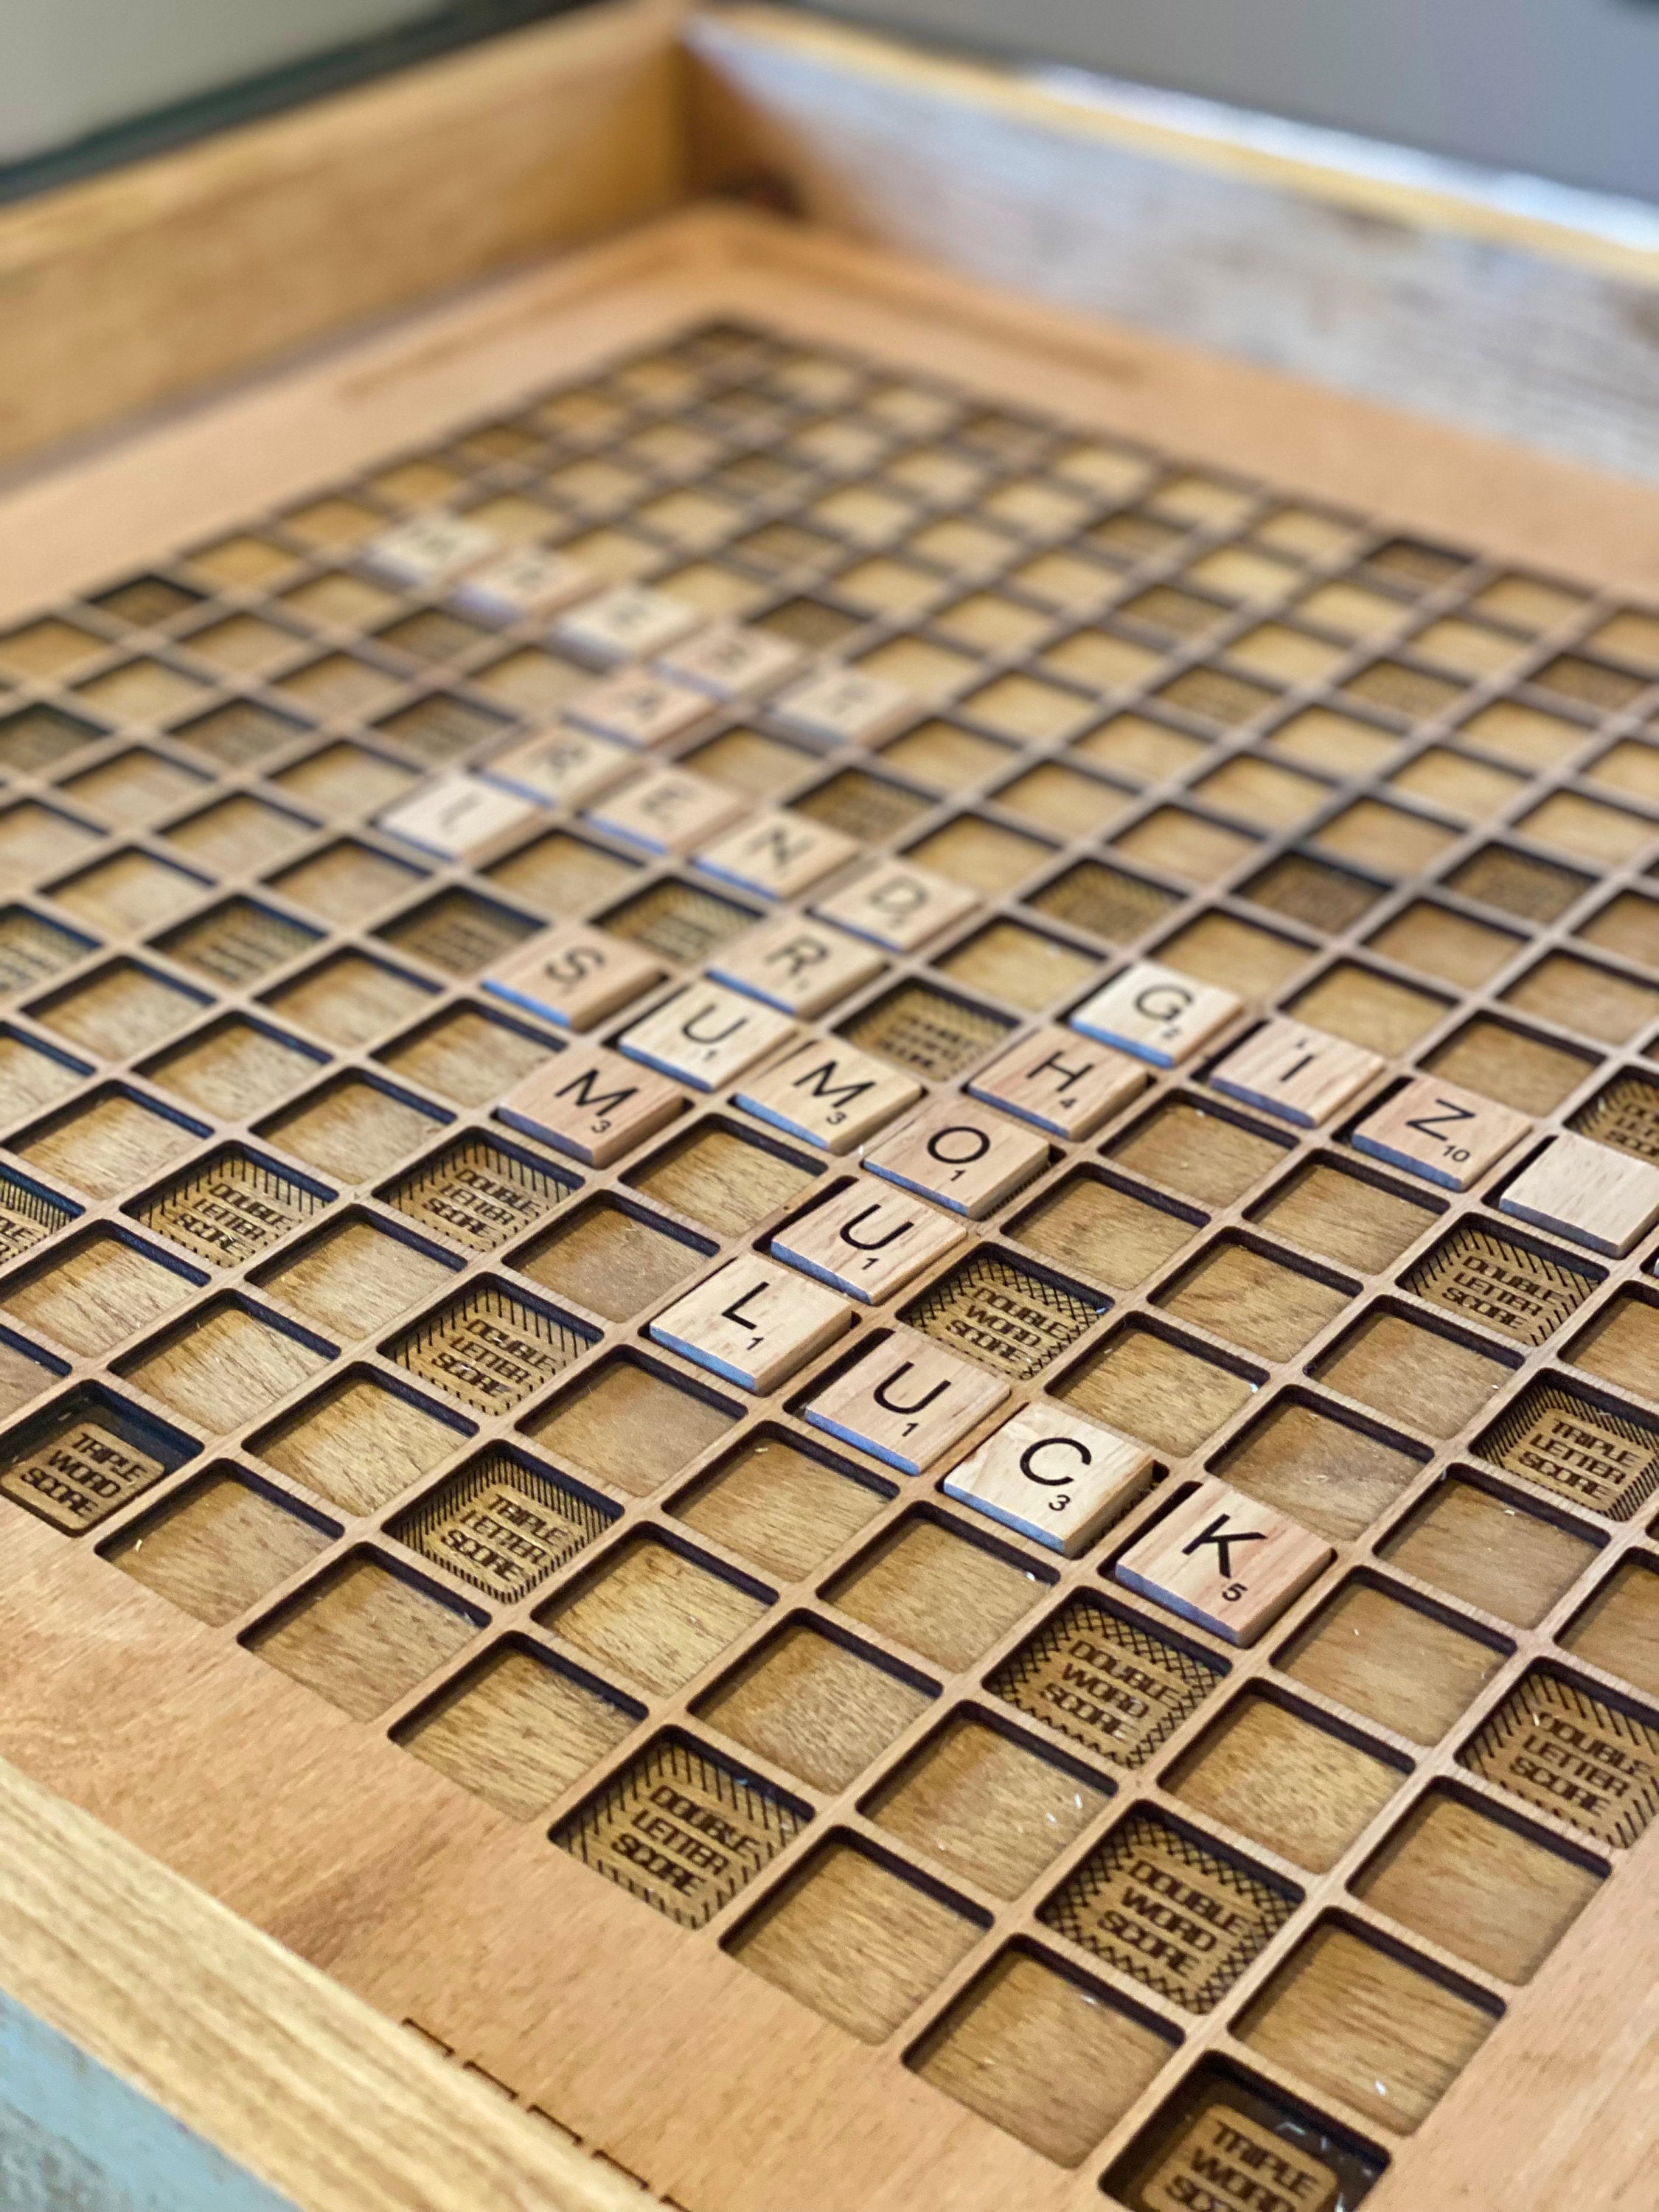 Free Printable Scrabble Tiles - Great Replacement or Lunch Game